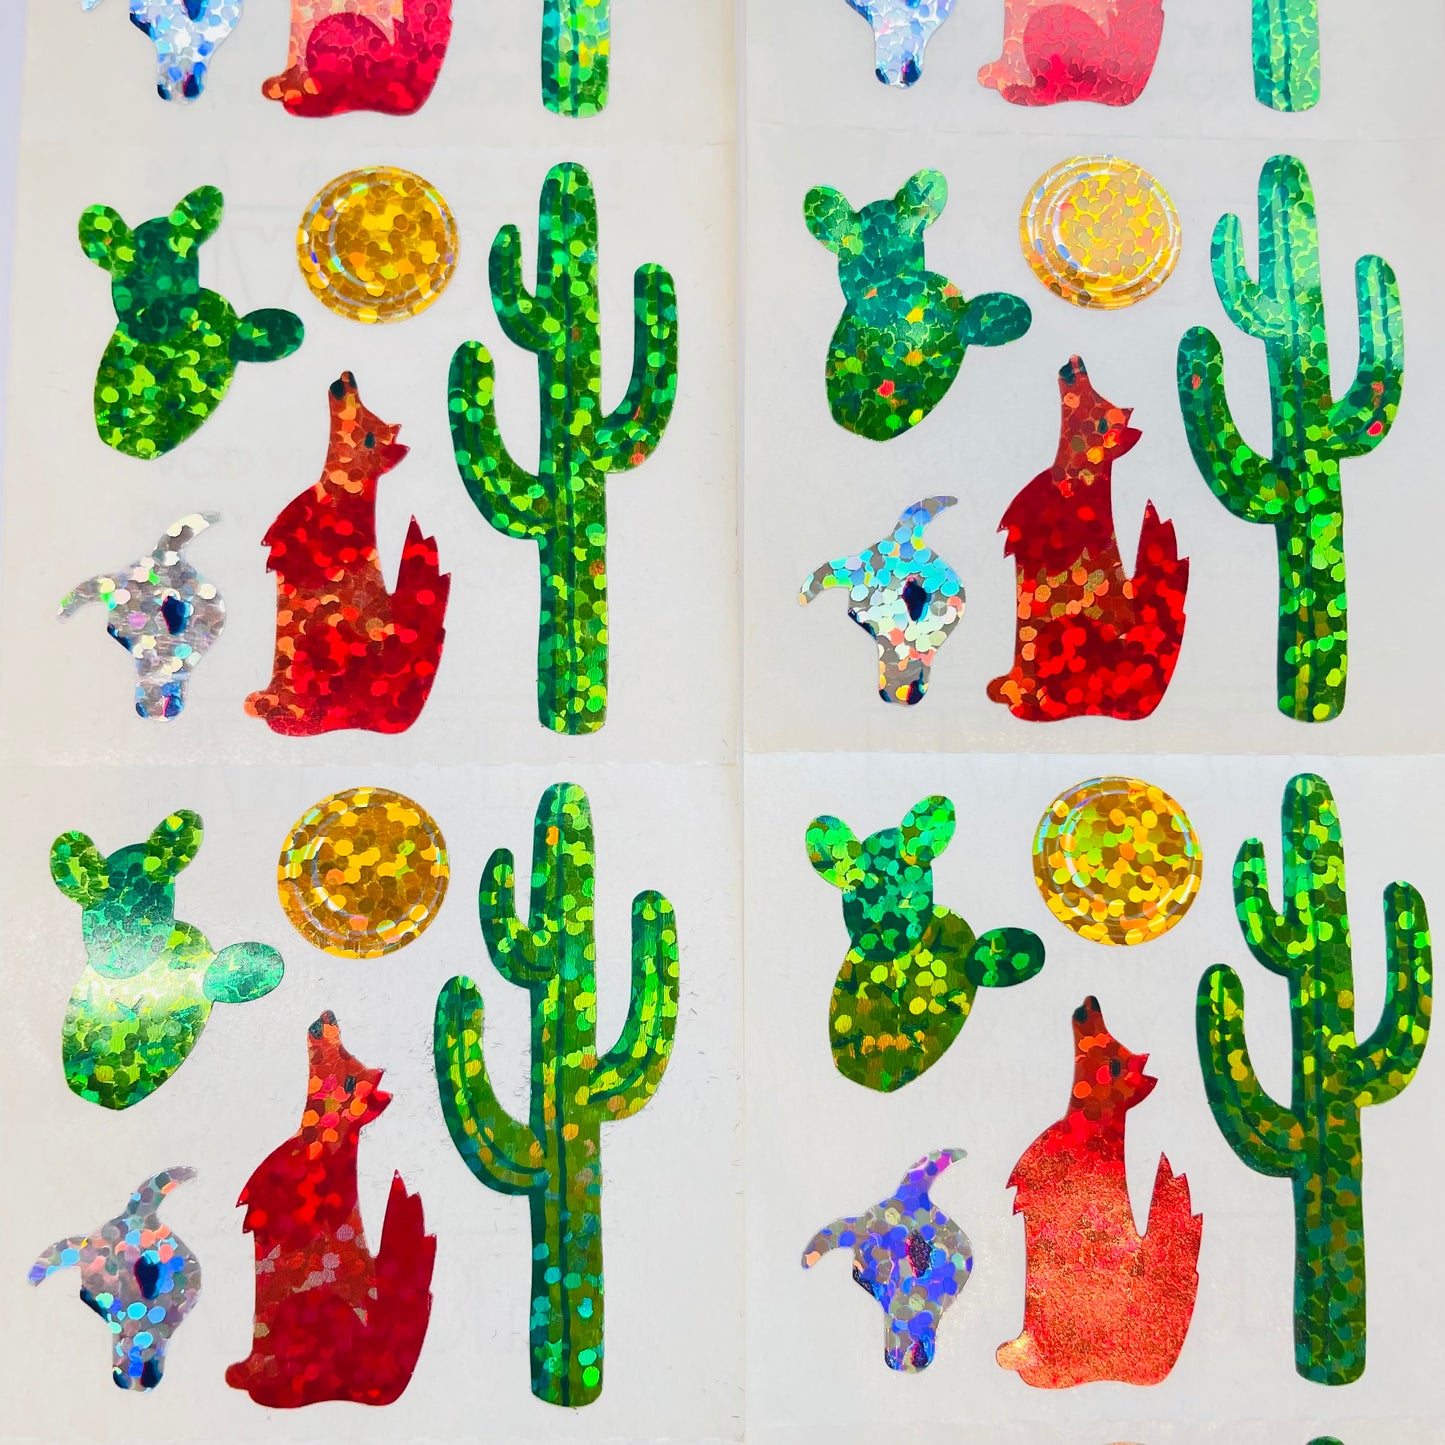 HAMBLY: Coyote, Cactus and Moon glitter stickers